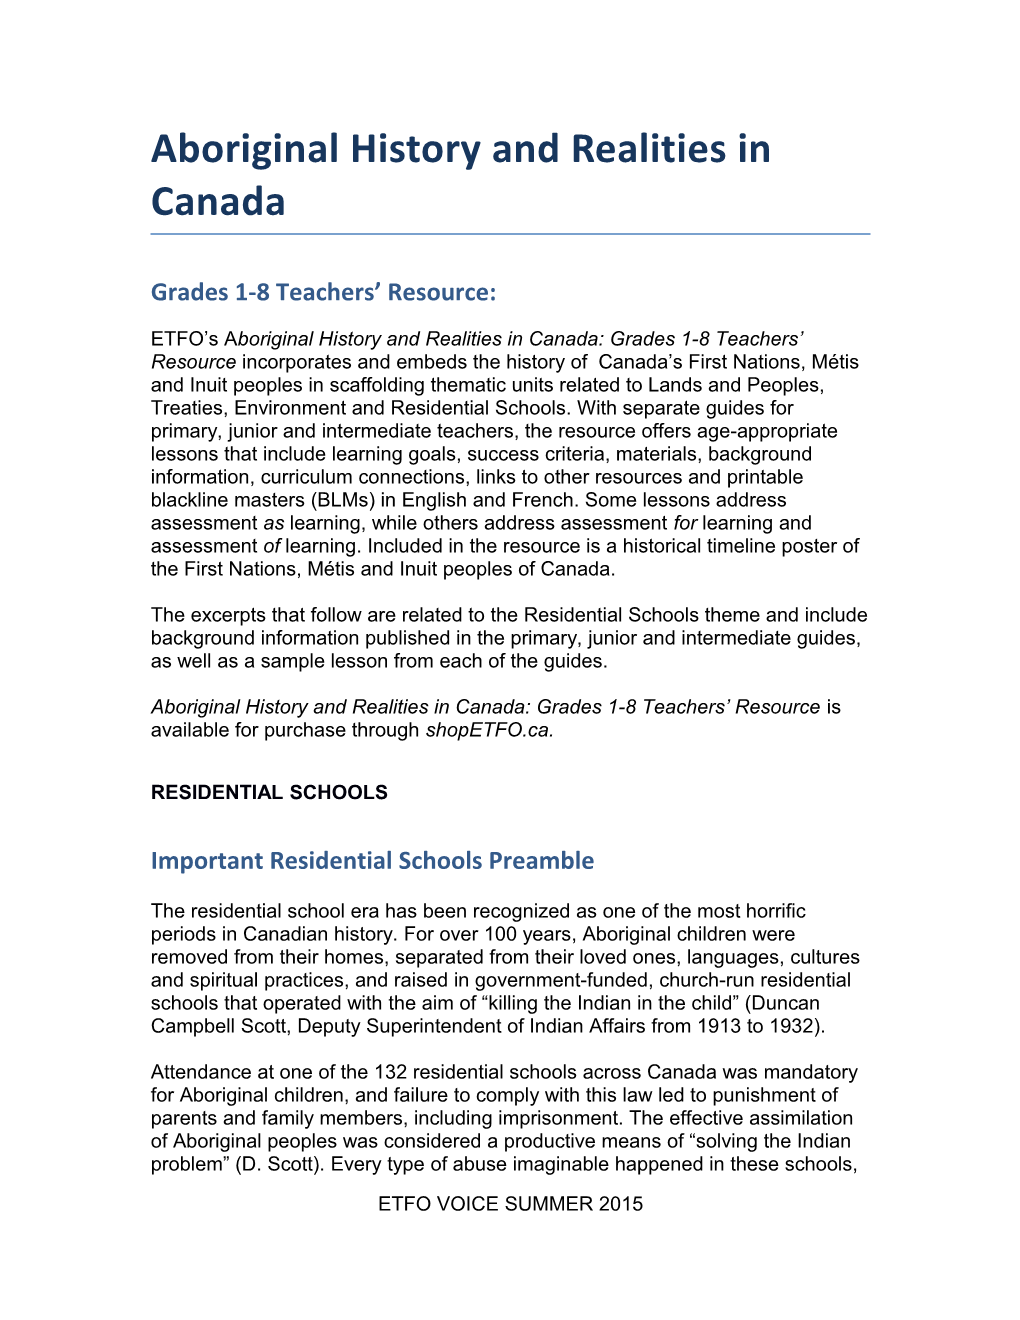 Aboriginal History and Realities in Canada